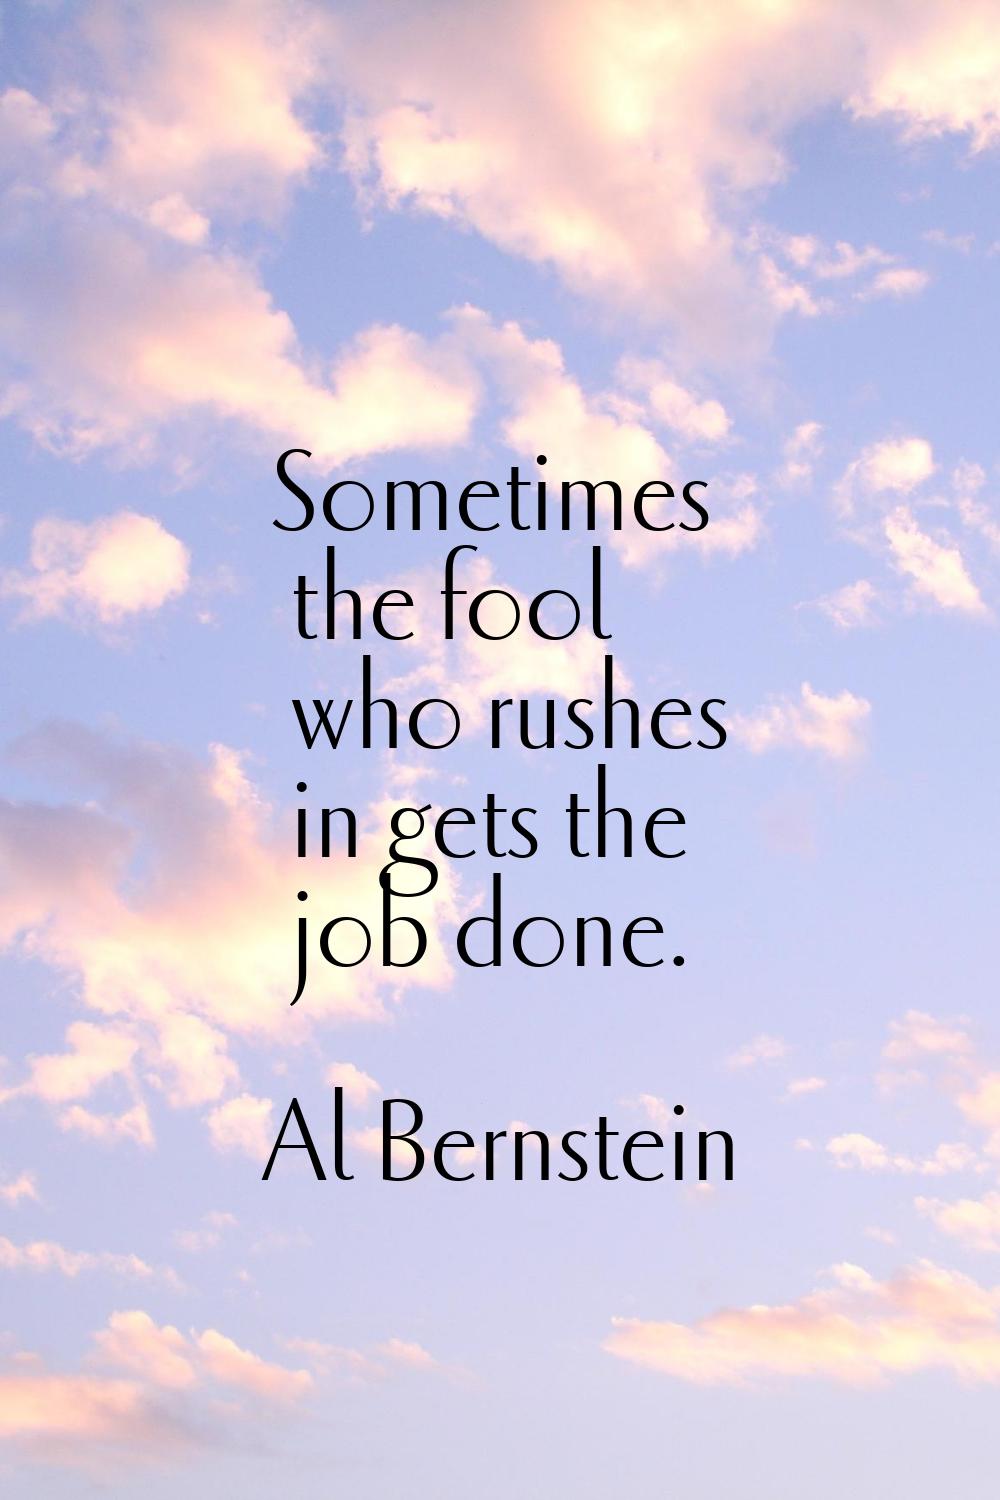 Sometimes the fool who rushes in gets the job done.